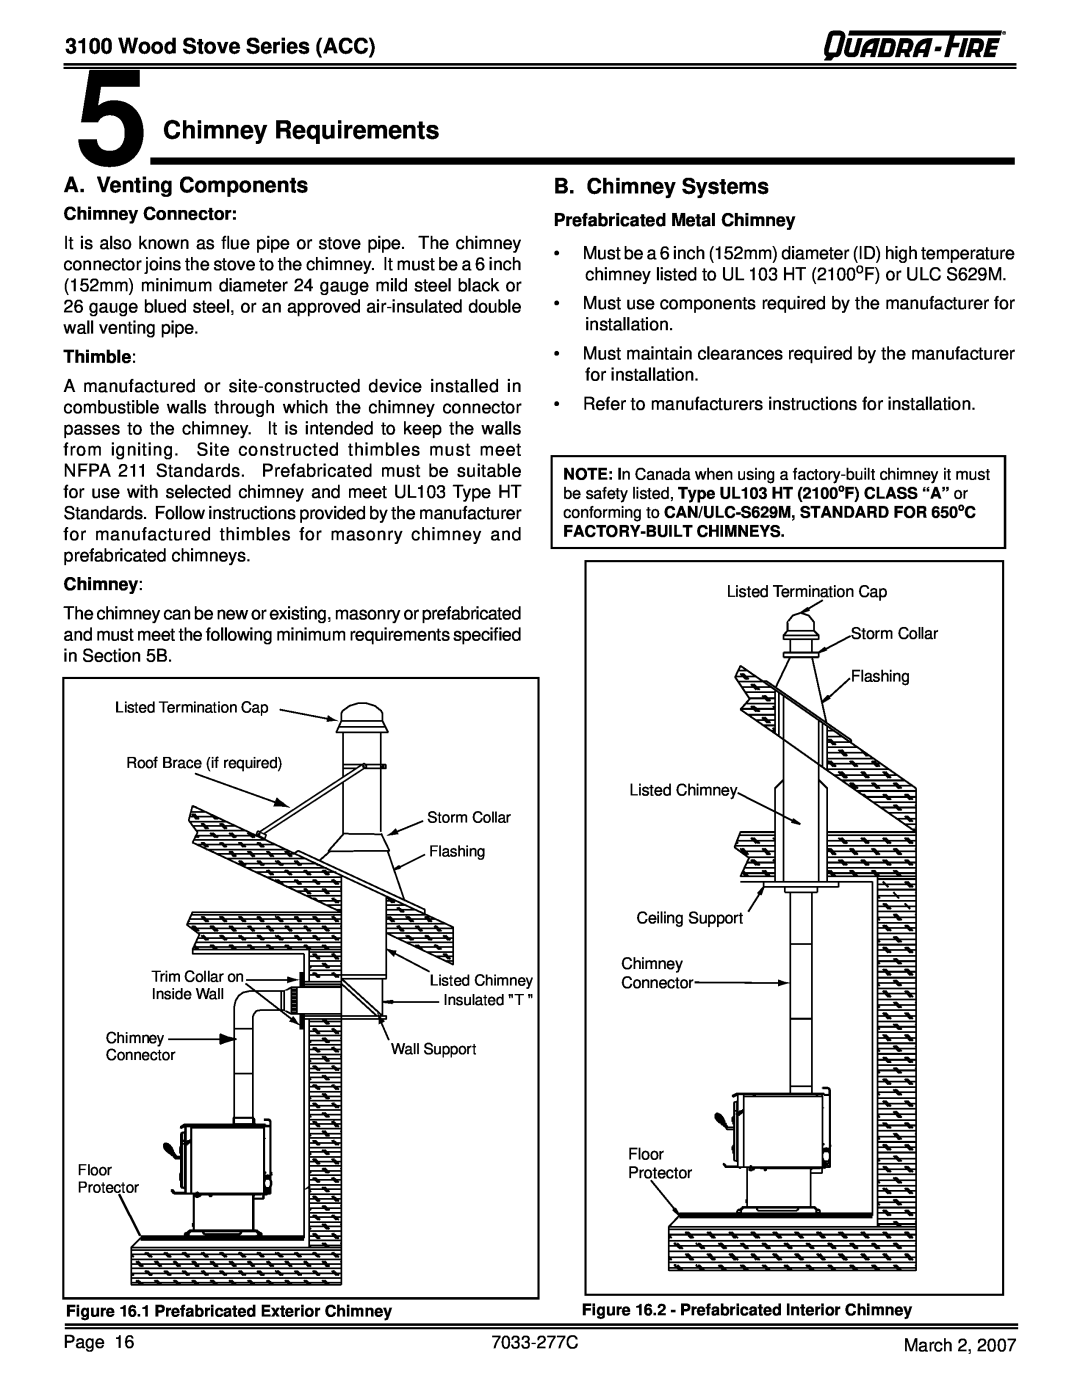 Quadra-Fire 31ST-ACC 5Chimney Requirements, Wood Stove Series ACC, A. Venting Components, B. Chimney Systems, Thimble 